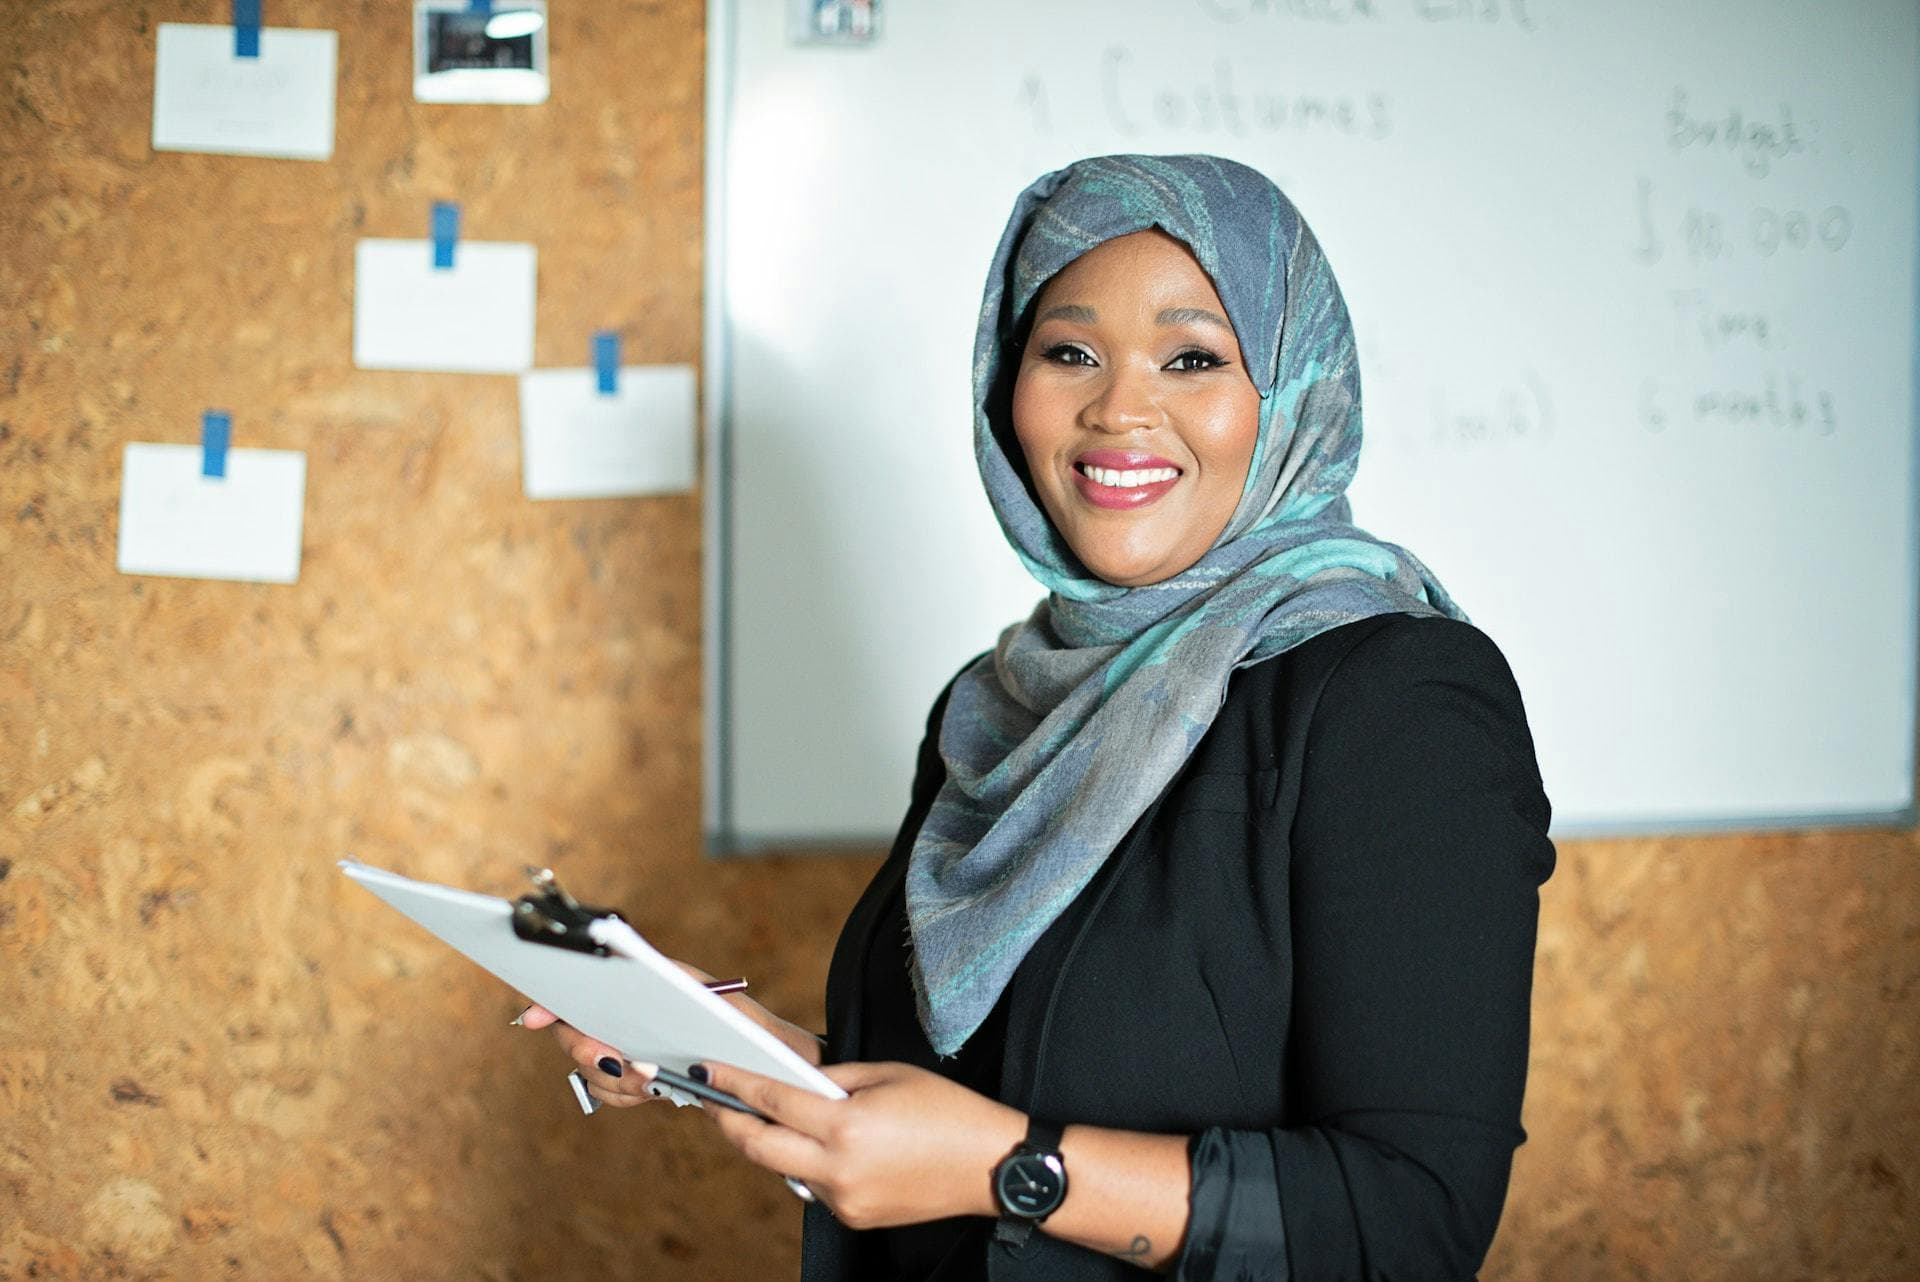 Female business owner in hijab in front of a whiteboard